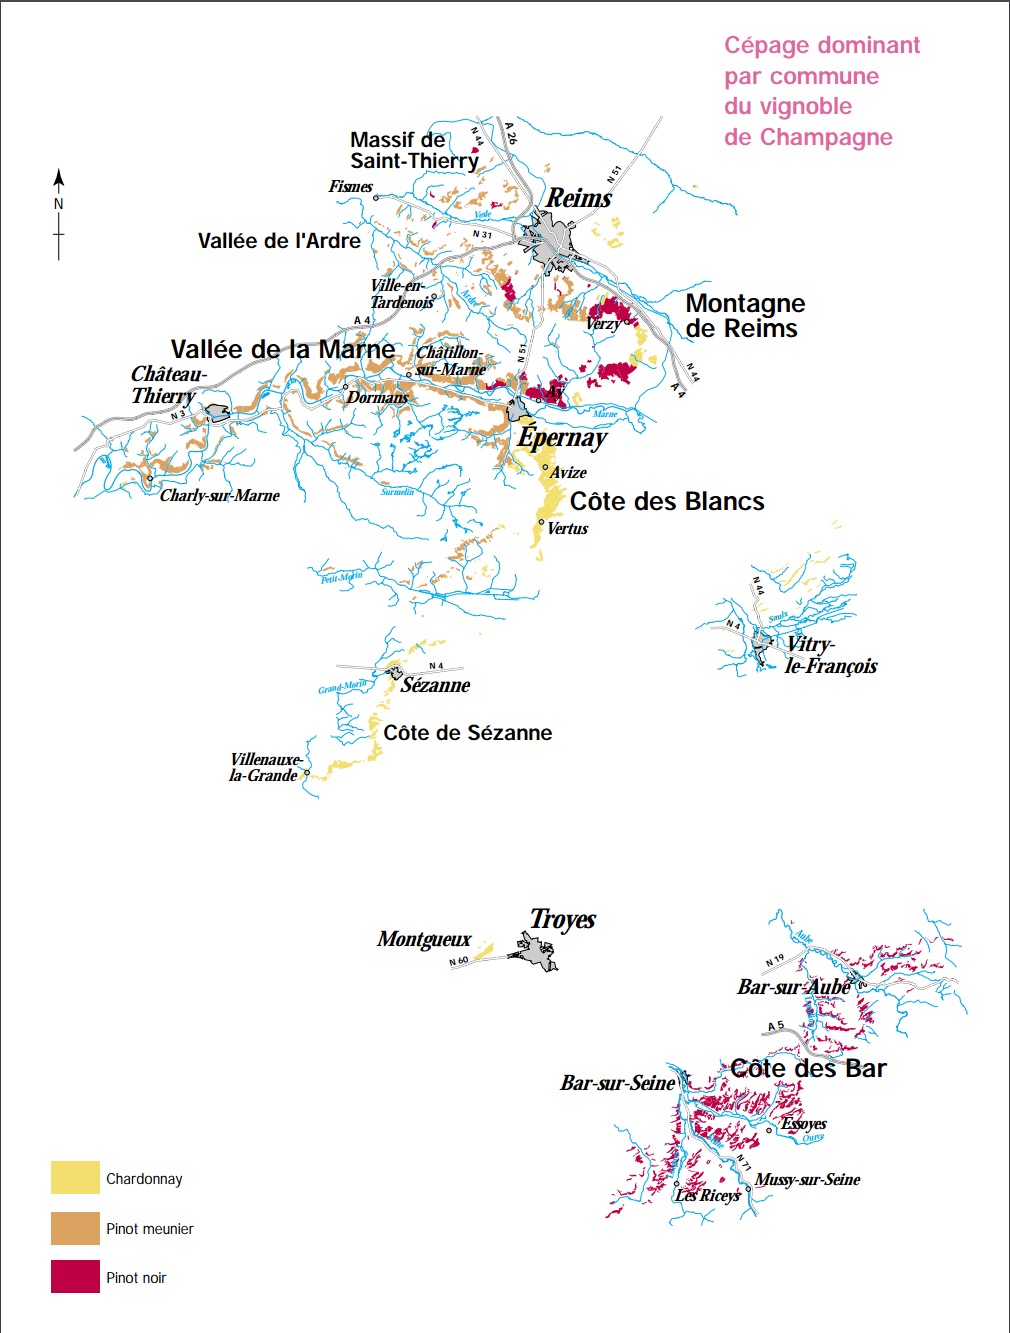 Maps Of Champagne By Grape Plantings 20 Subregions And More